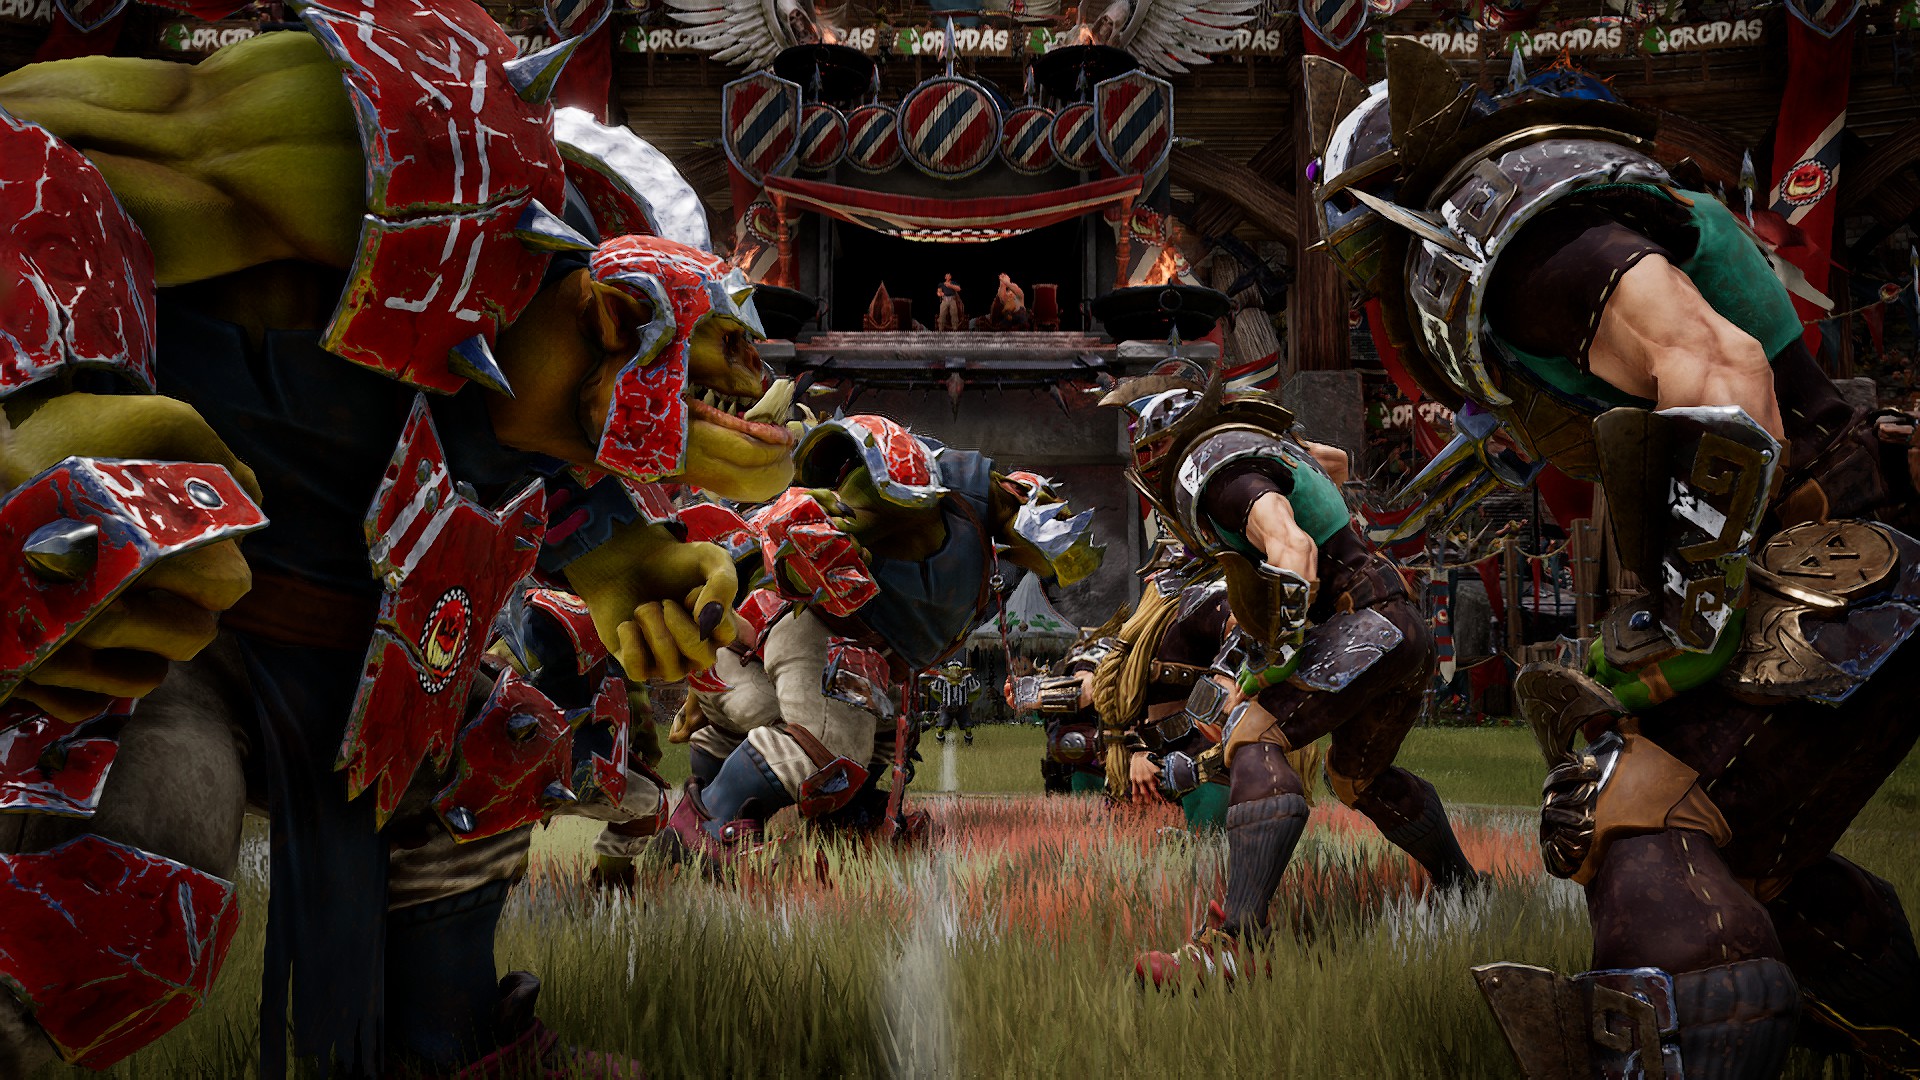 Blood Bowl 3 league commissioner letter - a team of humans and a team of Orcs face off, screenshot from Cyanide Studio's Blood Bowl 3